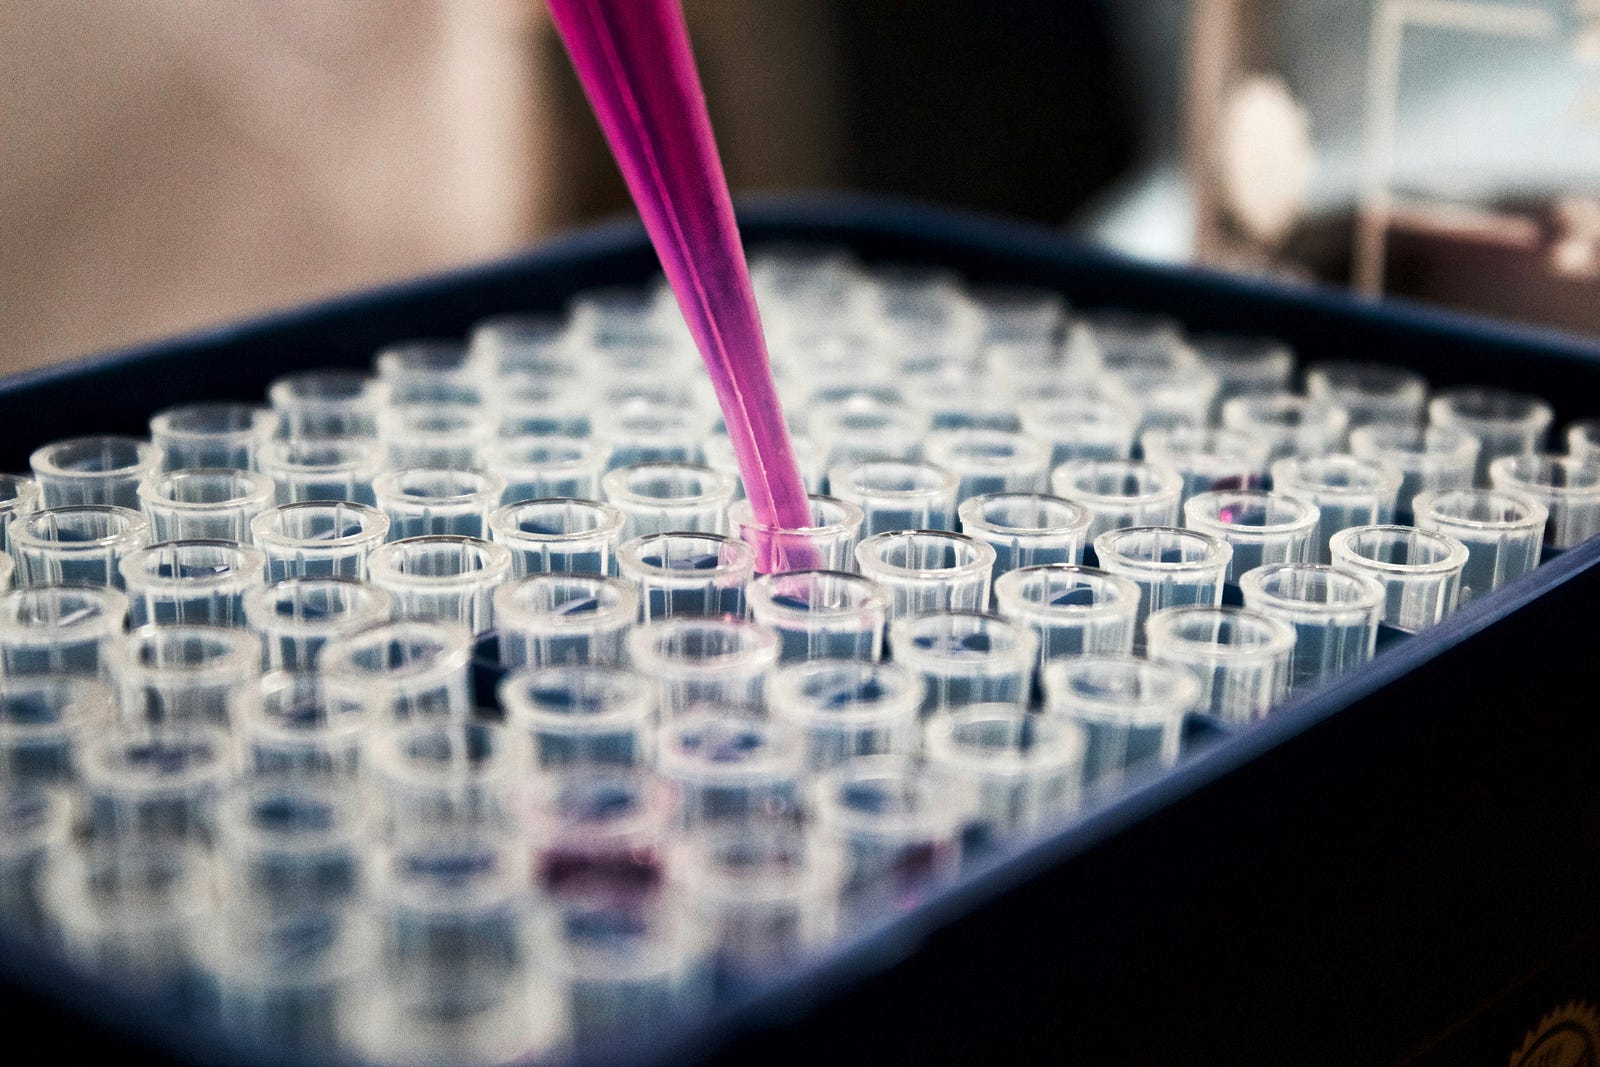 A pipette with pink fluid fills a pipette in a basket of dozens of glass pipettes.